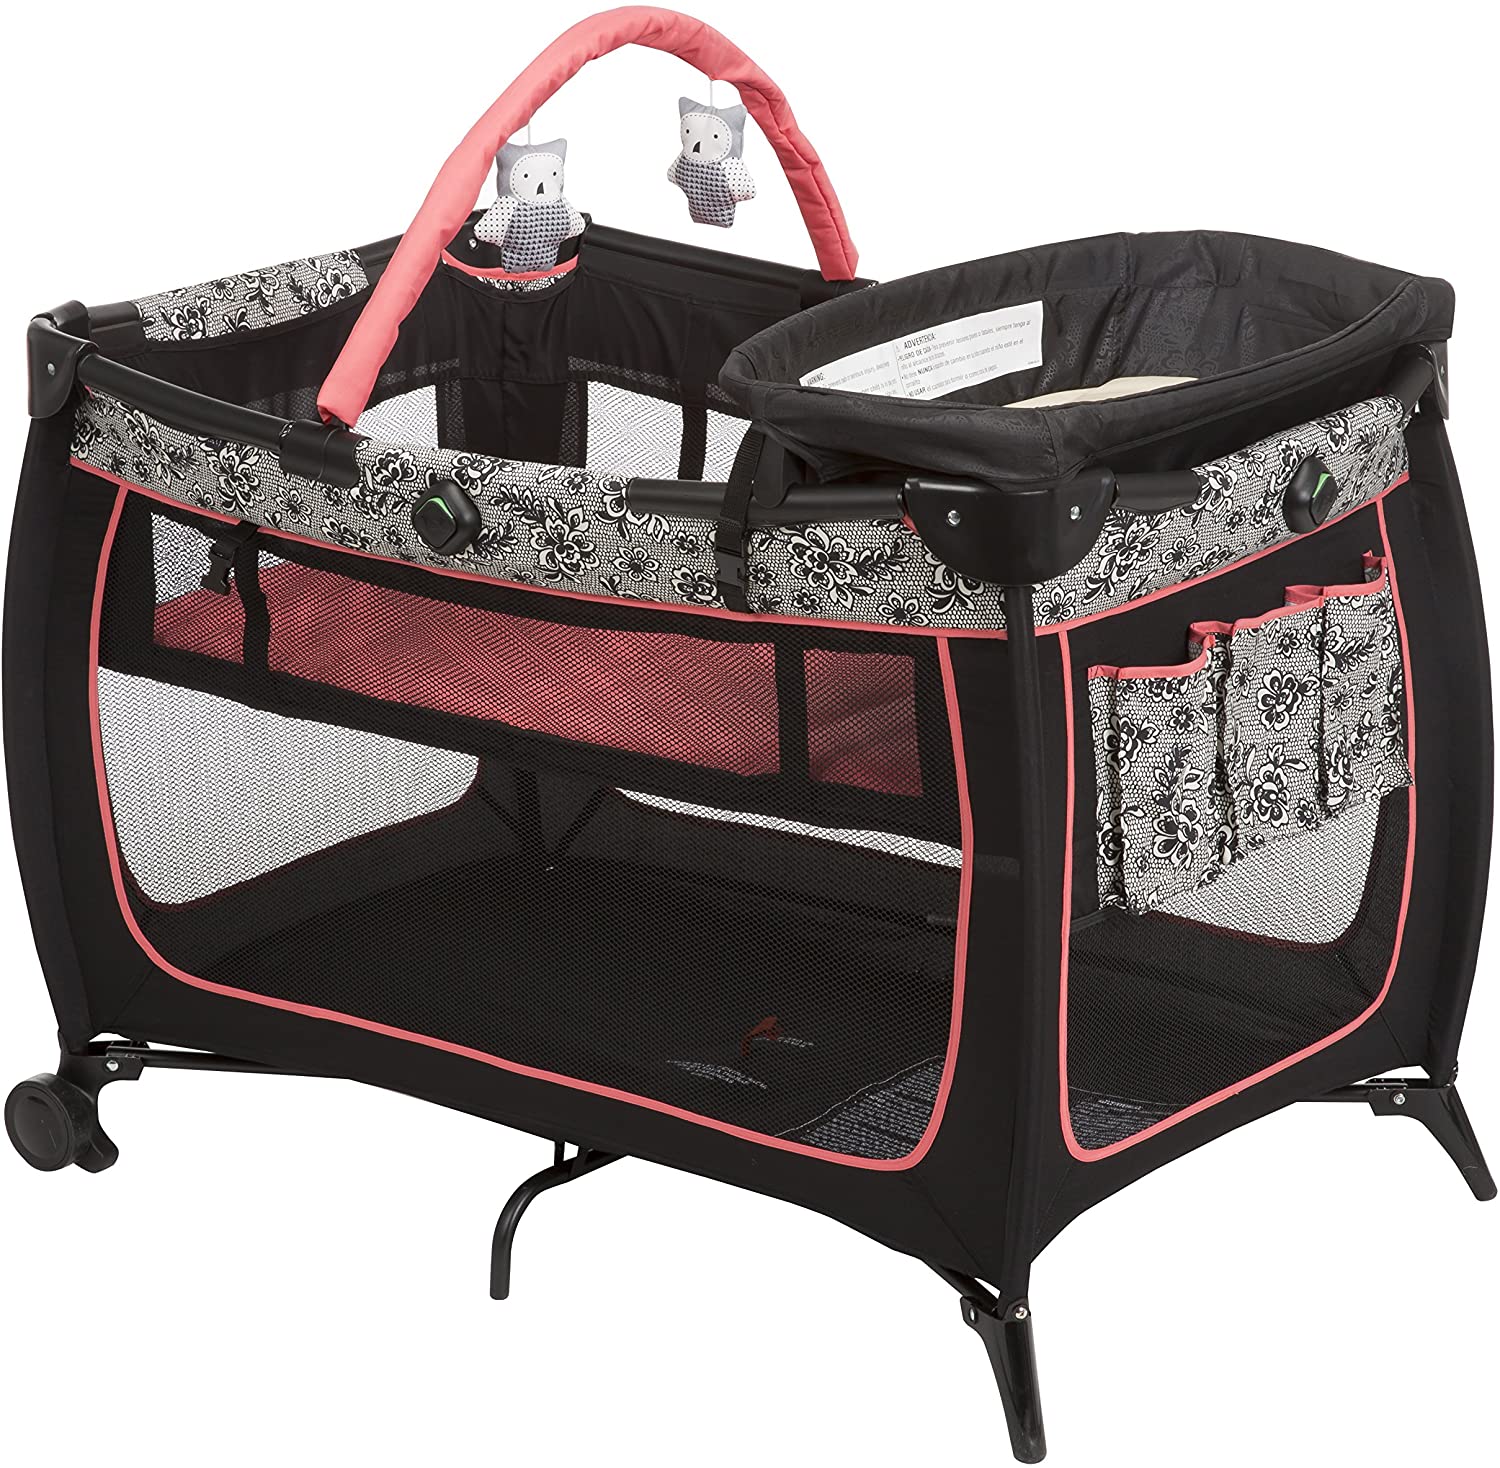 Safe Stages Playard Gentle Lac